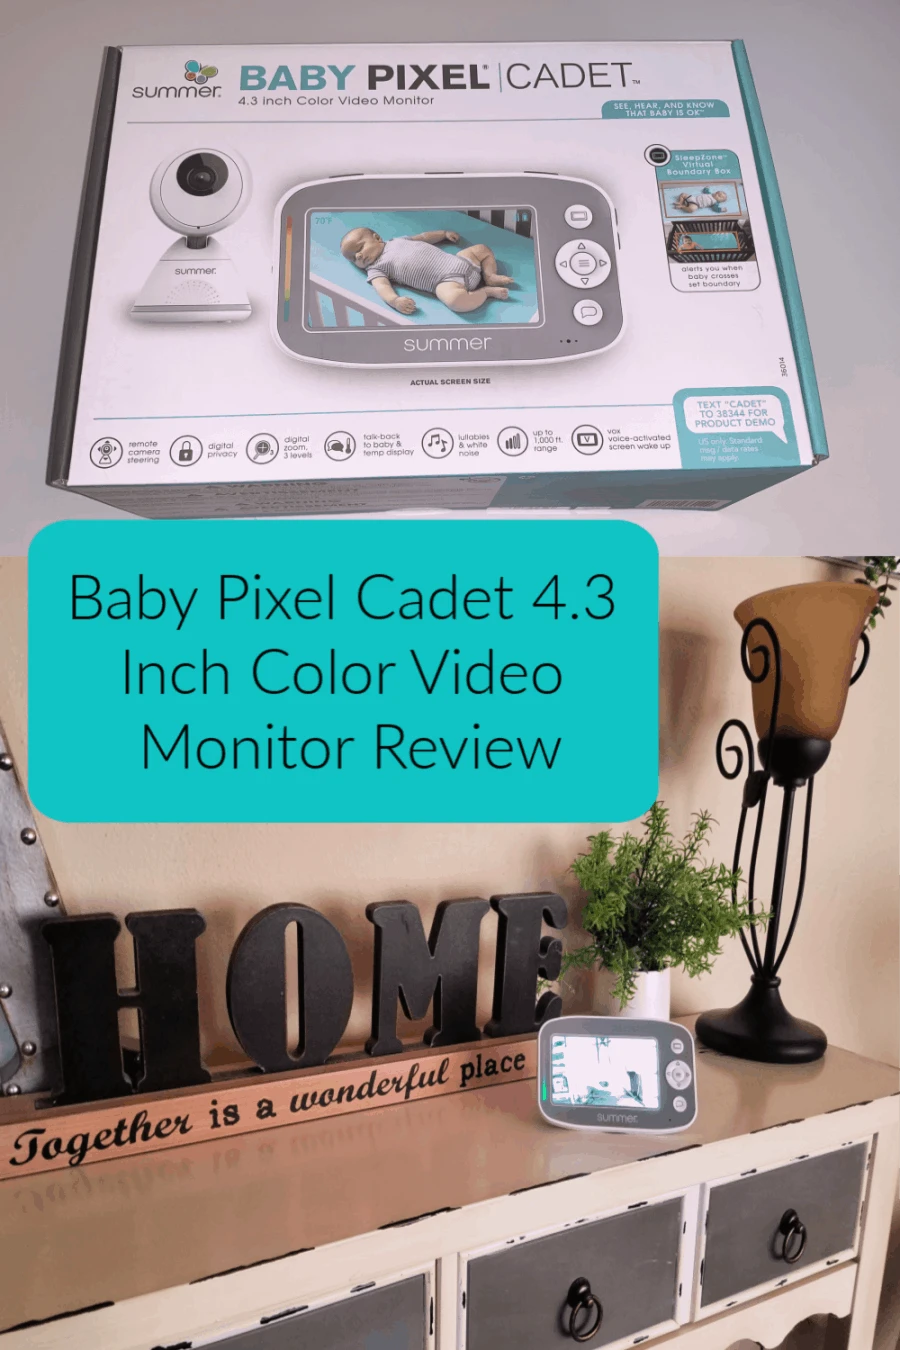 Baby Pixel Cadet 4.3 Inch Color Video Monitor Review